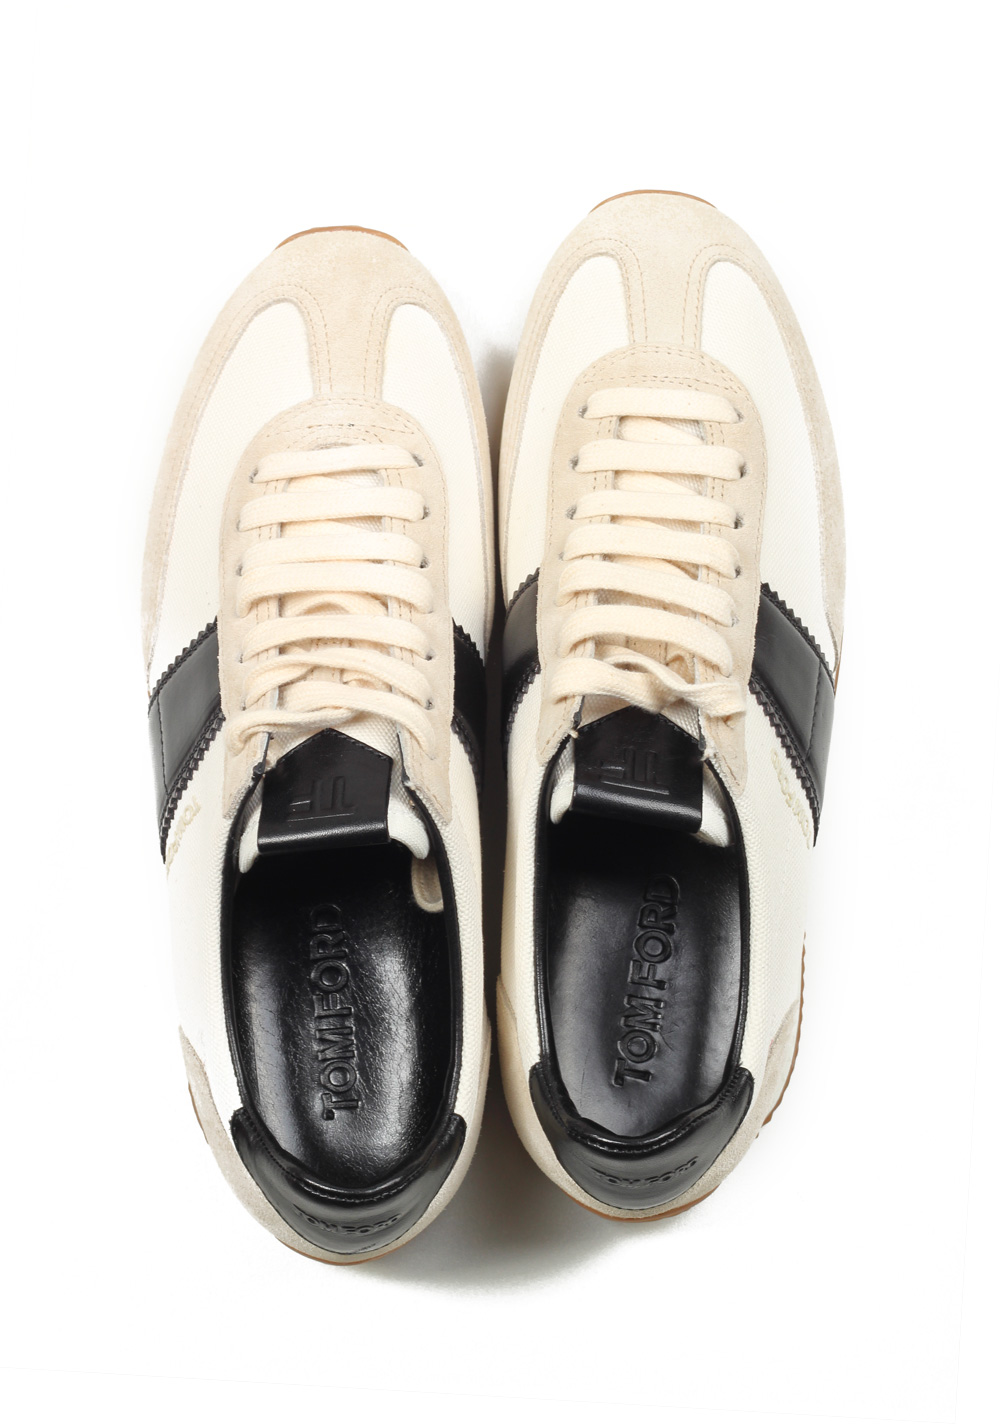 TOM FORD Orford Colorblock Suede White Black Trainer Sneaker Shoes Size 6 UK / 7 U.S. | Costume Limité